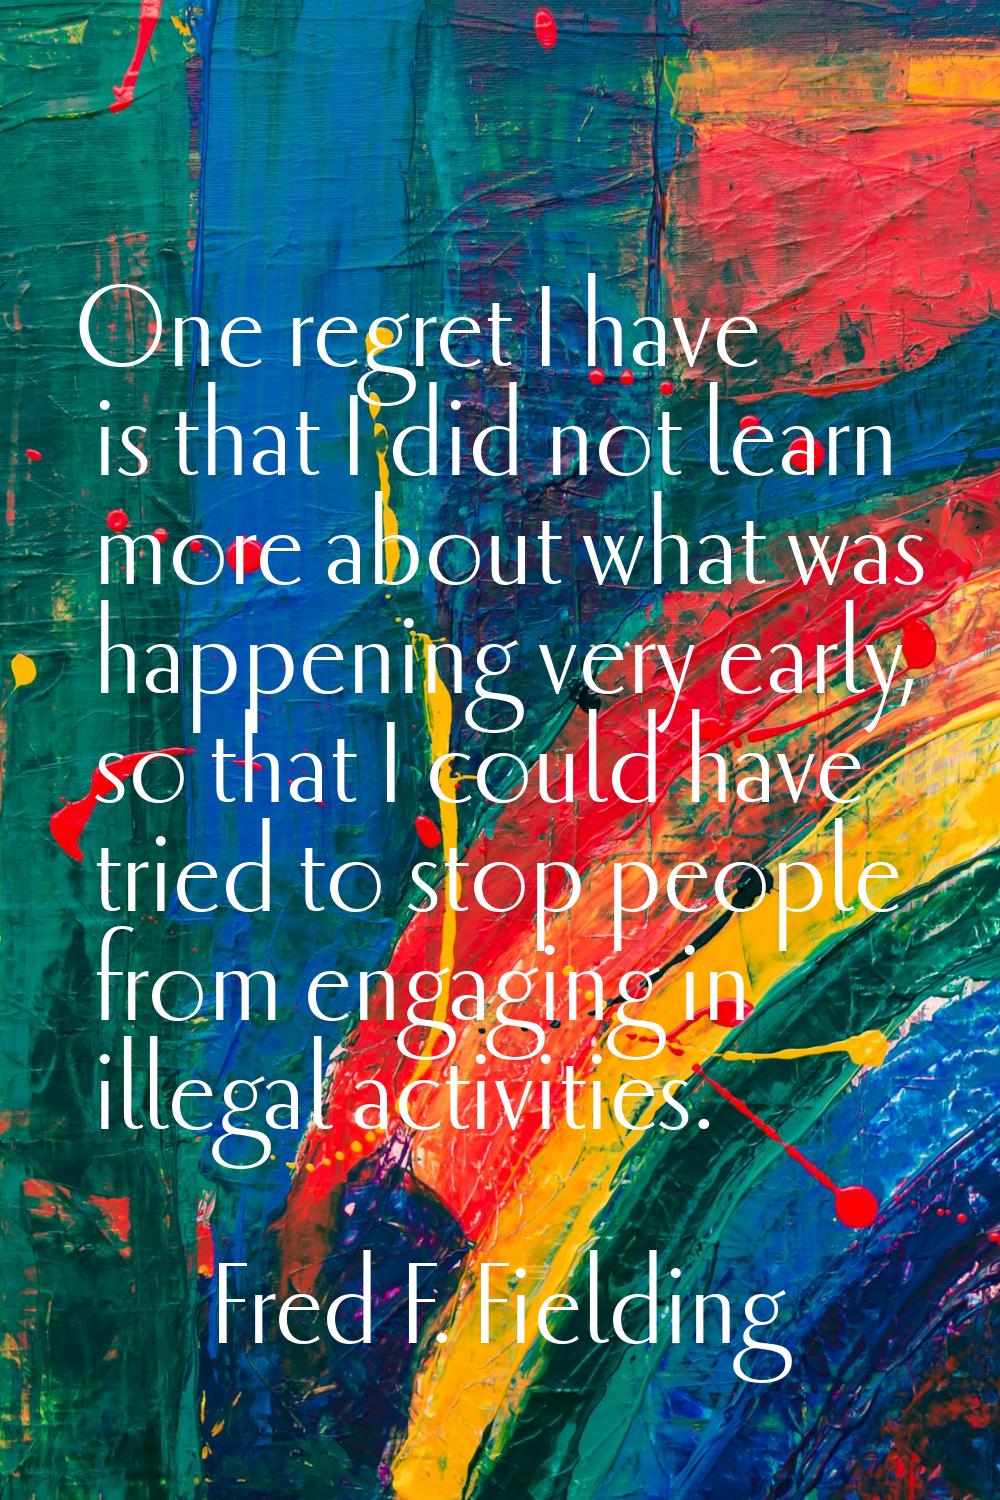 One regret I have is that I did not learn more about what was happening very early, so that I could